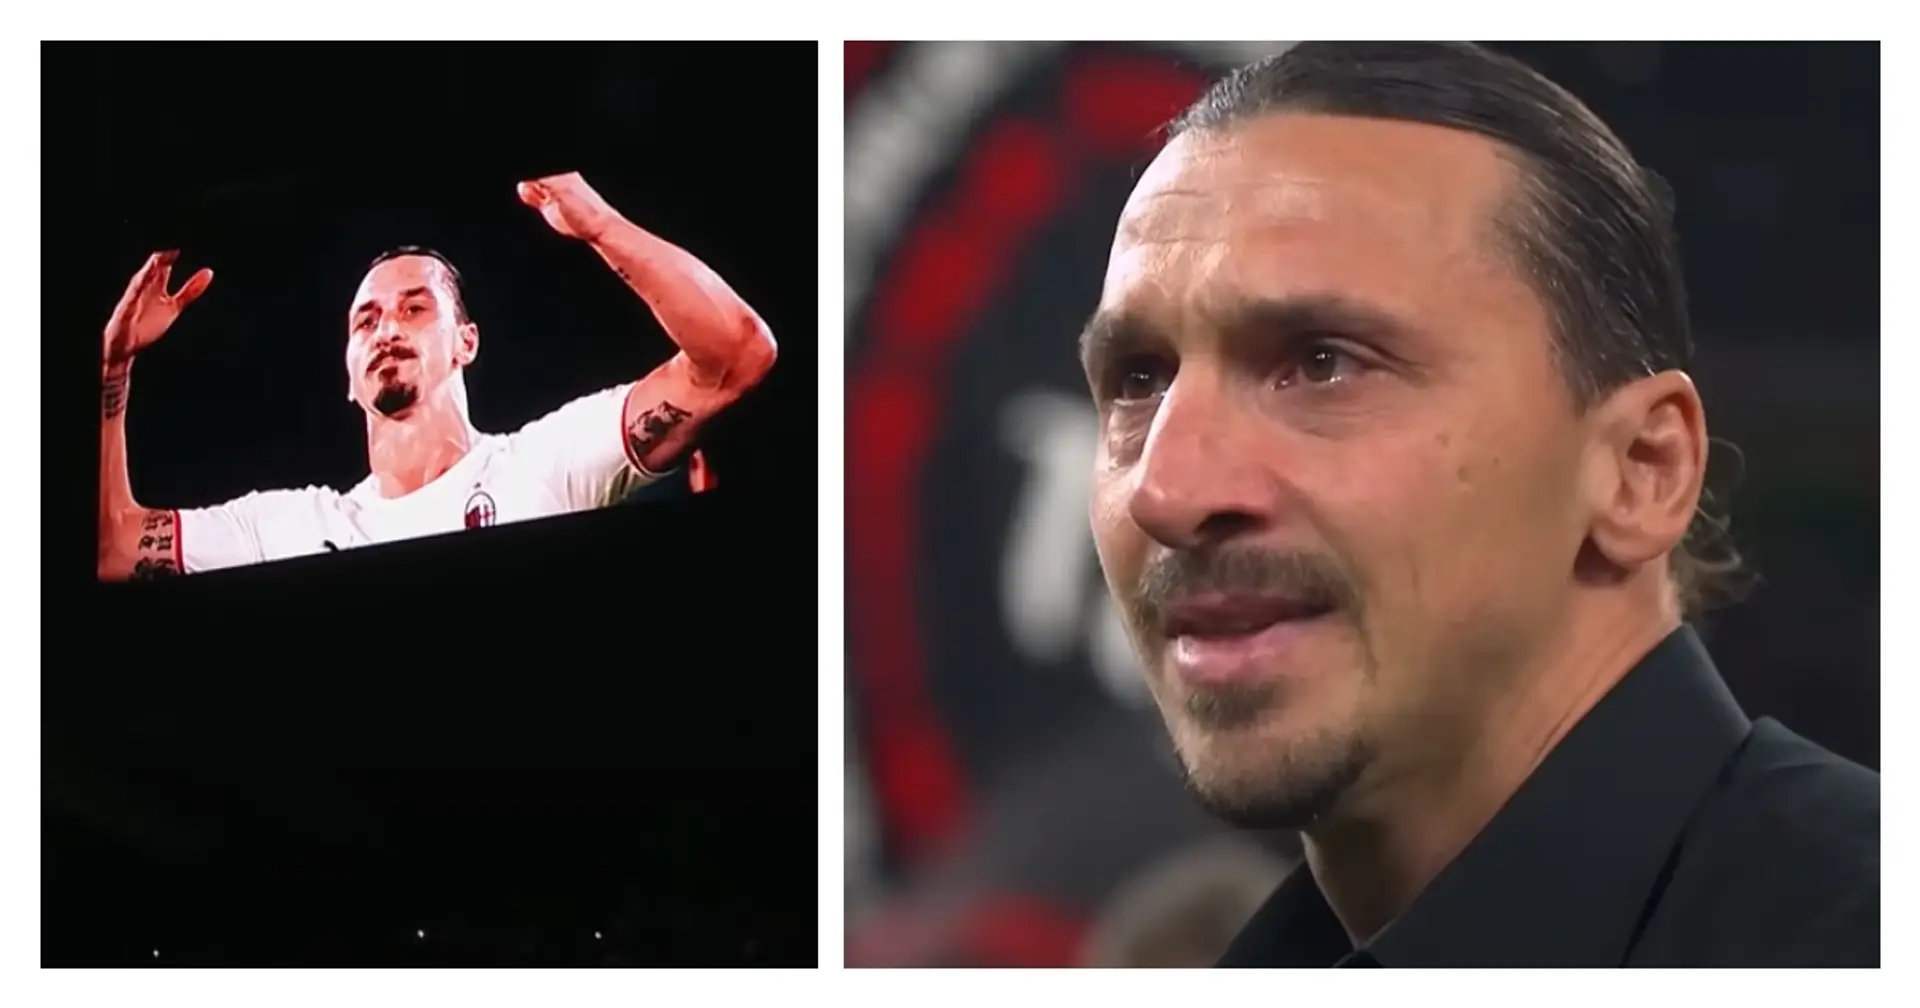 Zlatan Ibrahimovic can't hold back tears as he says goodbye to AC Milan and professional football